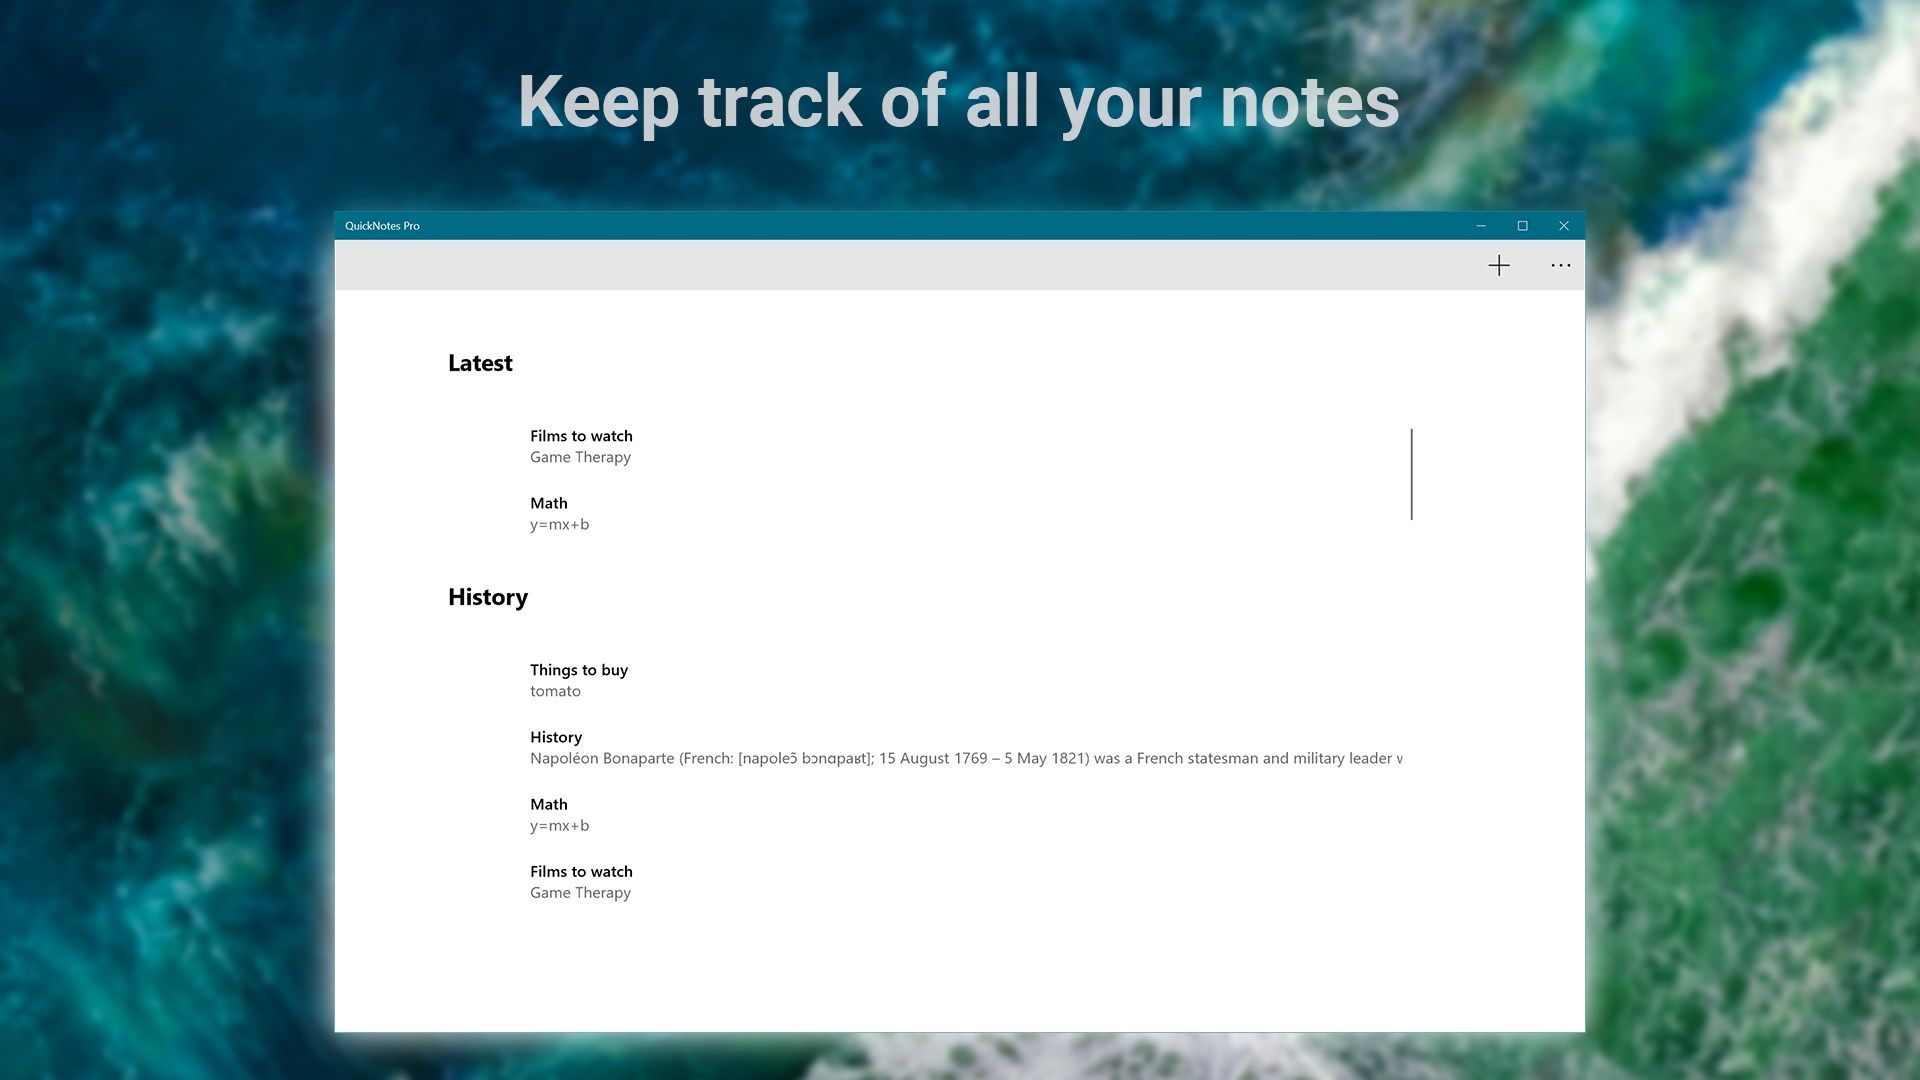 keep track of all your notes!